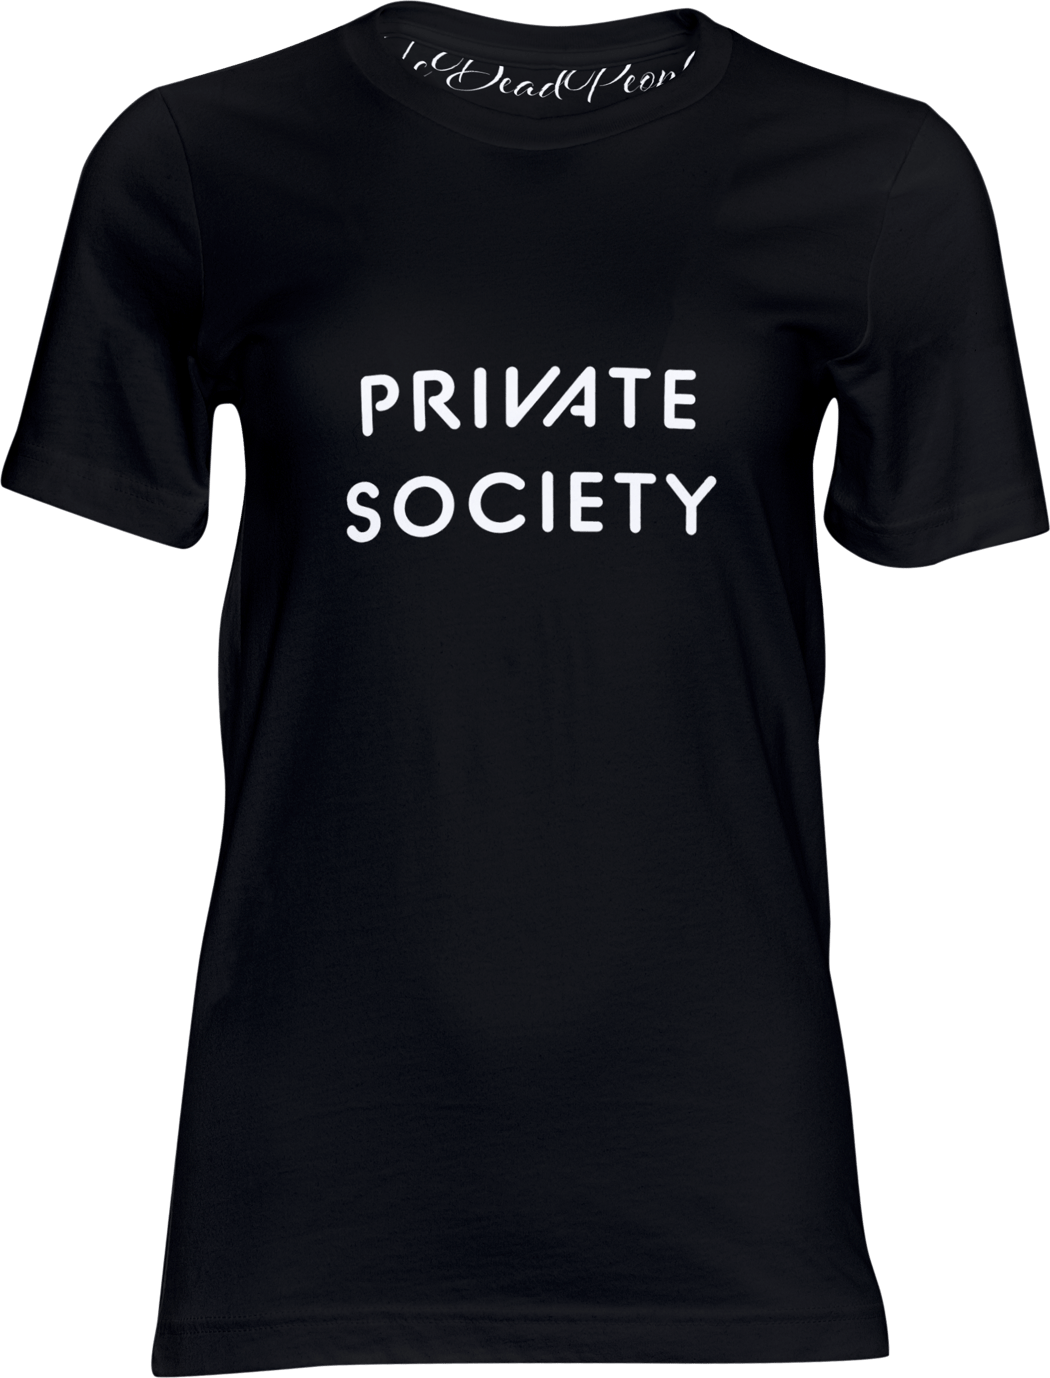 PRIVATE SOCIETY Tshirt IcDeadPeople